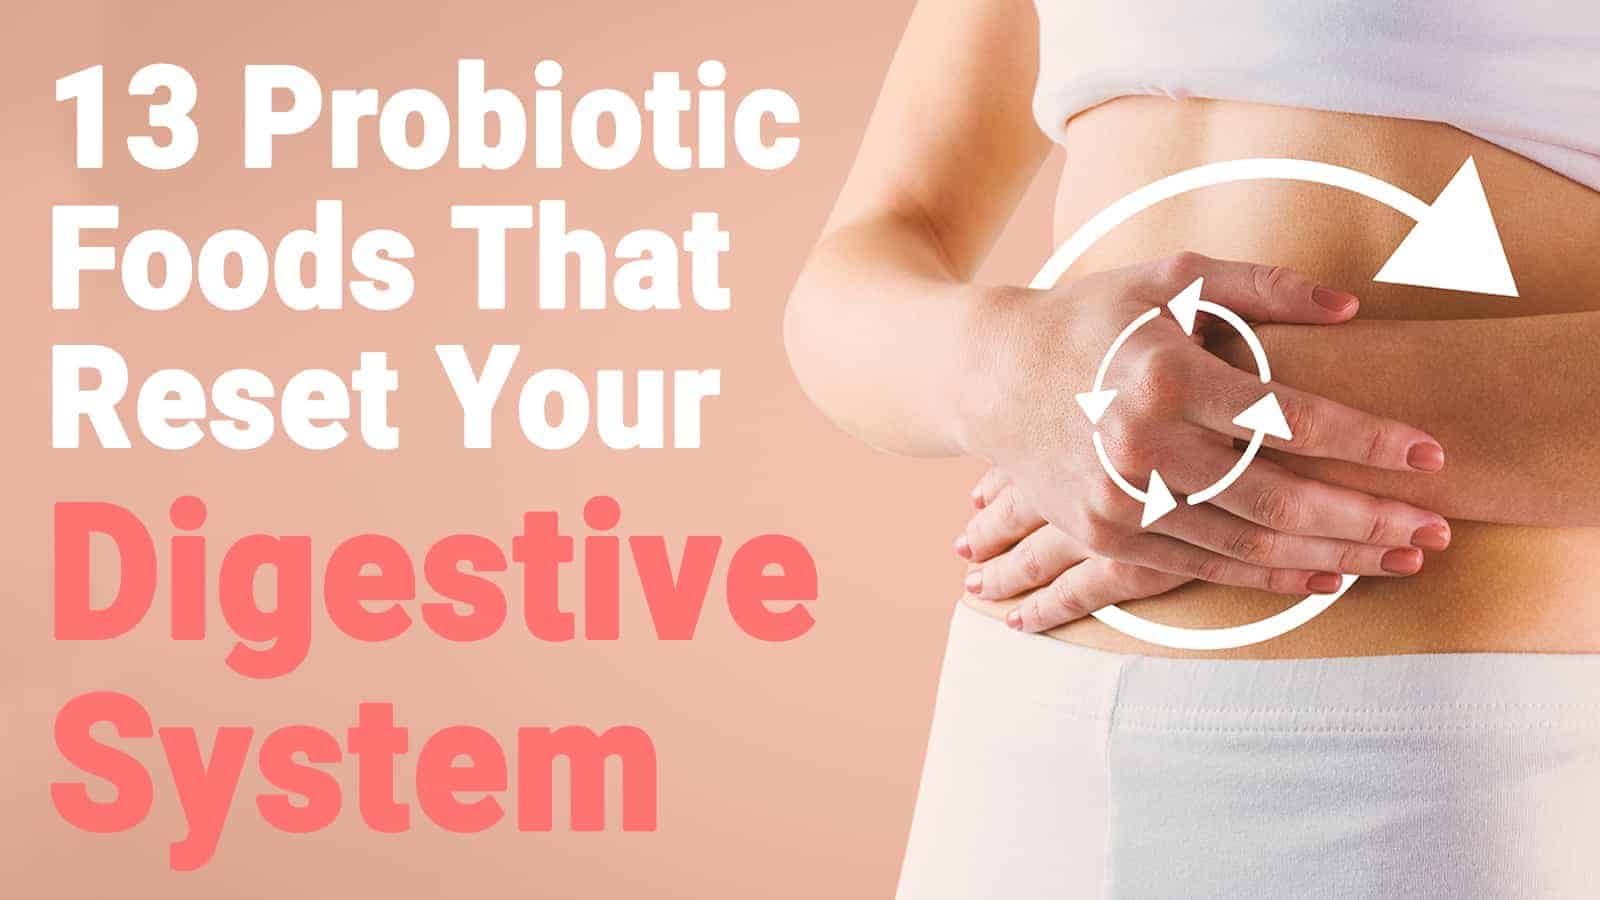 13 Probiotic Foods That Reset Your Digestive System